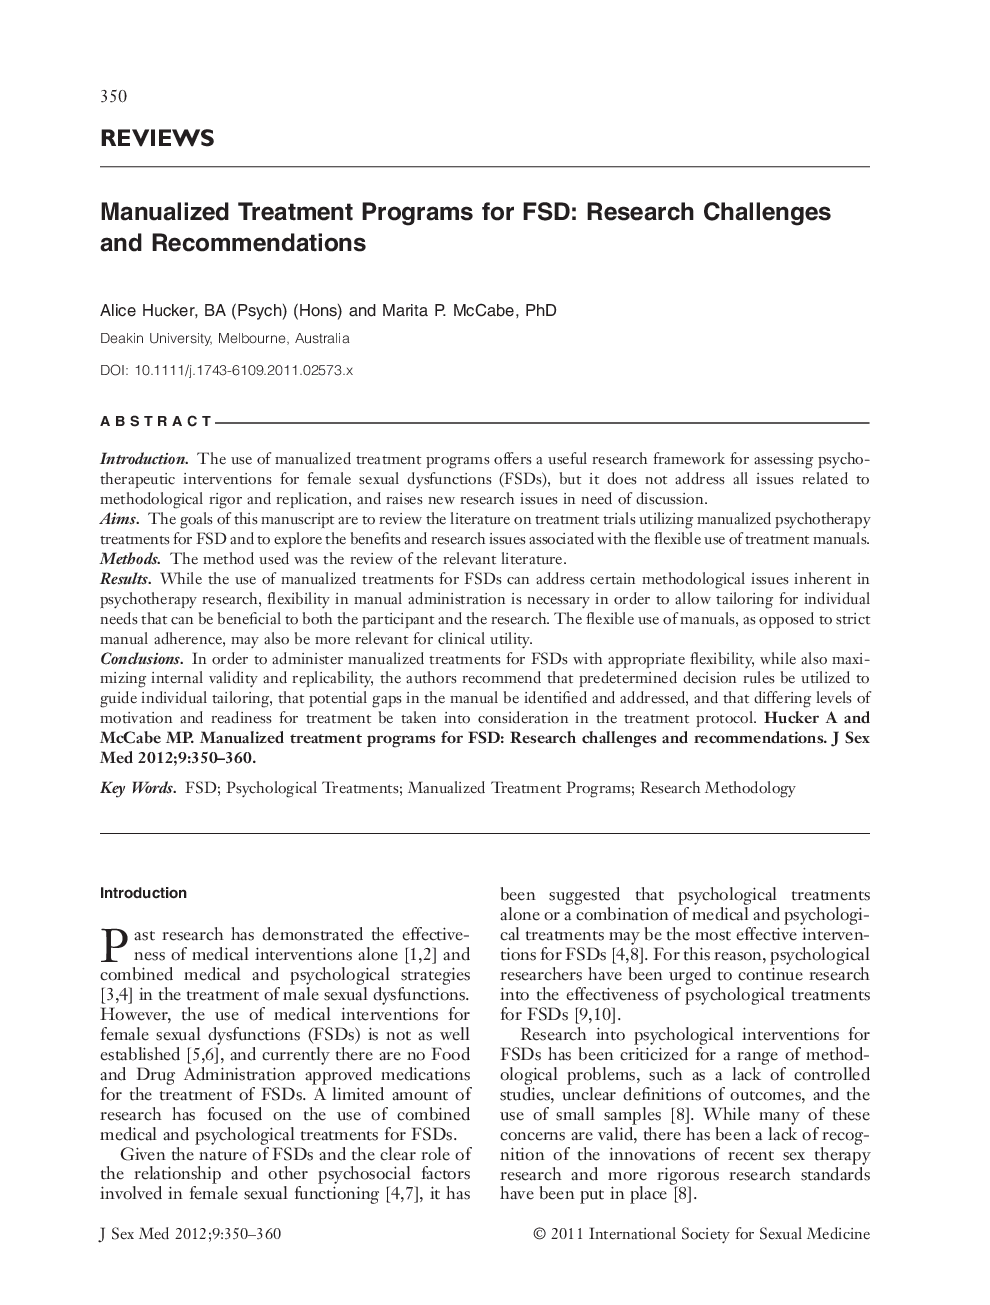 Manualized Treatment Programs for FSD: Research Challenges and Recommendations